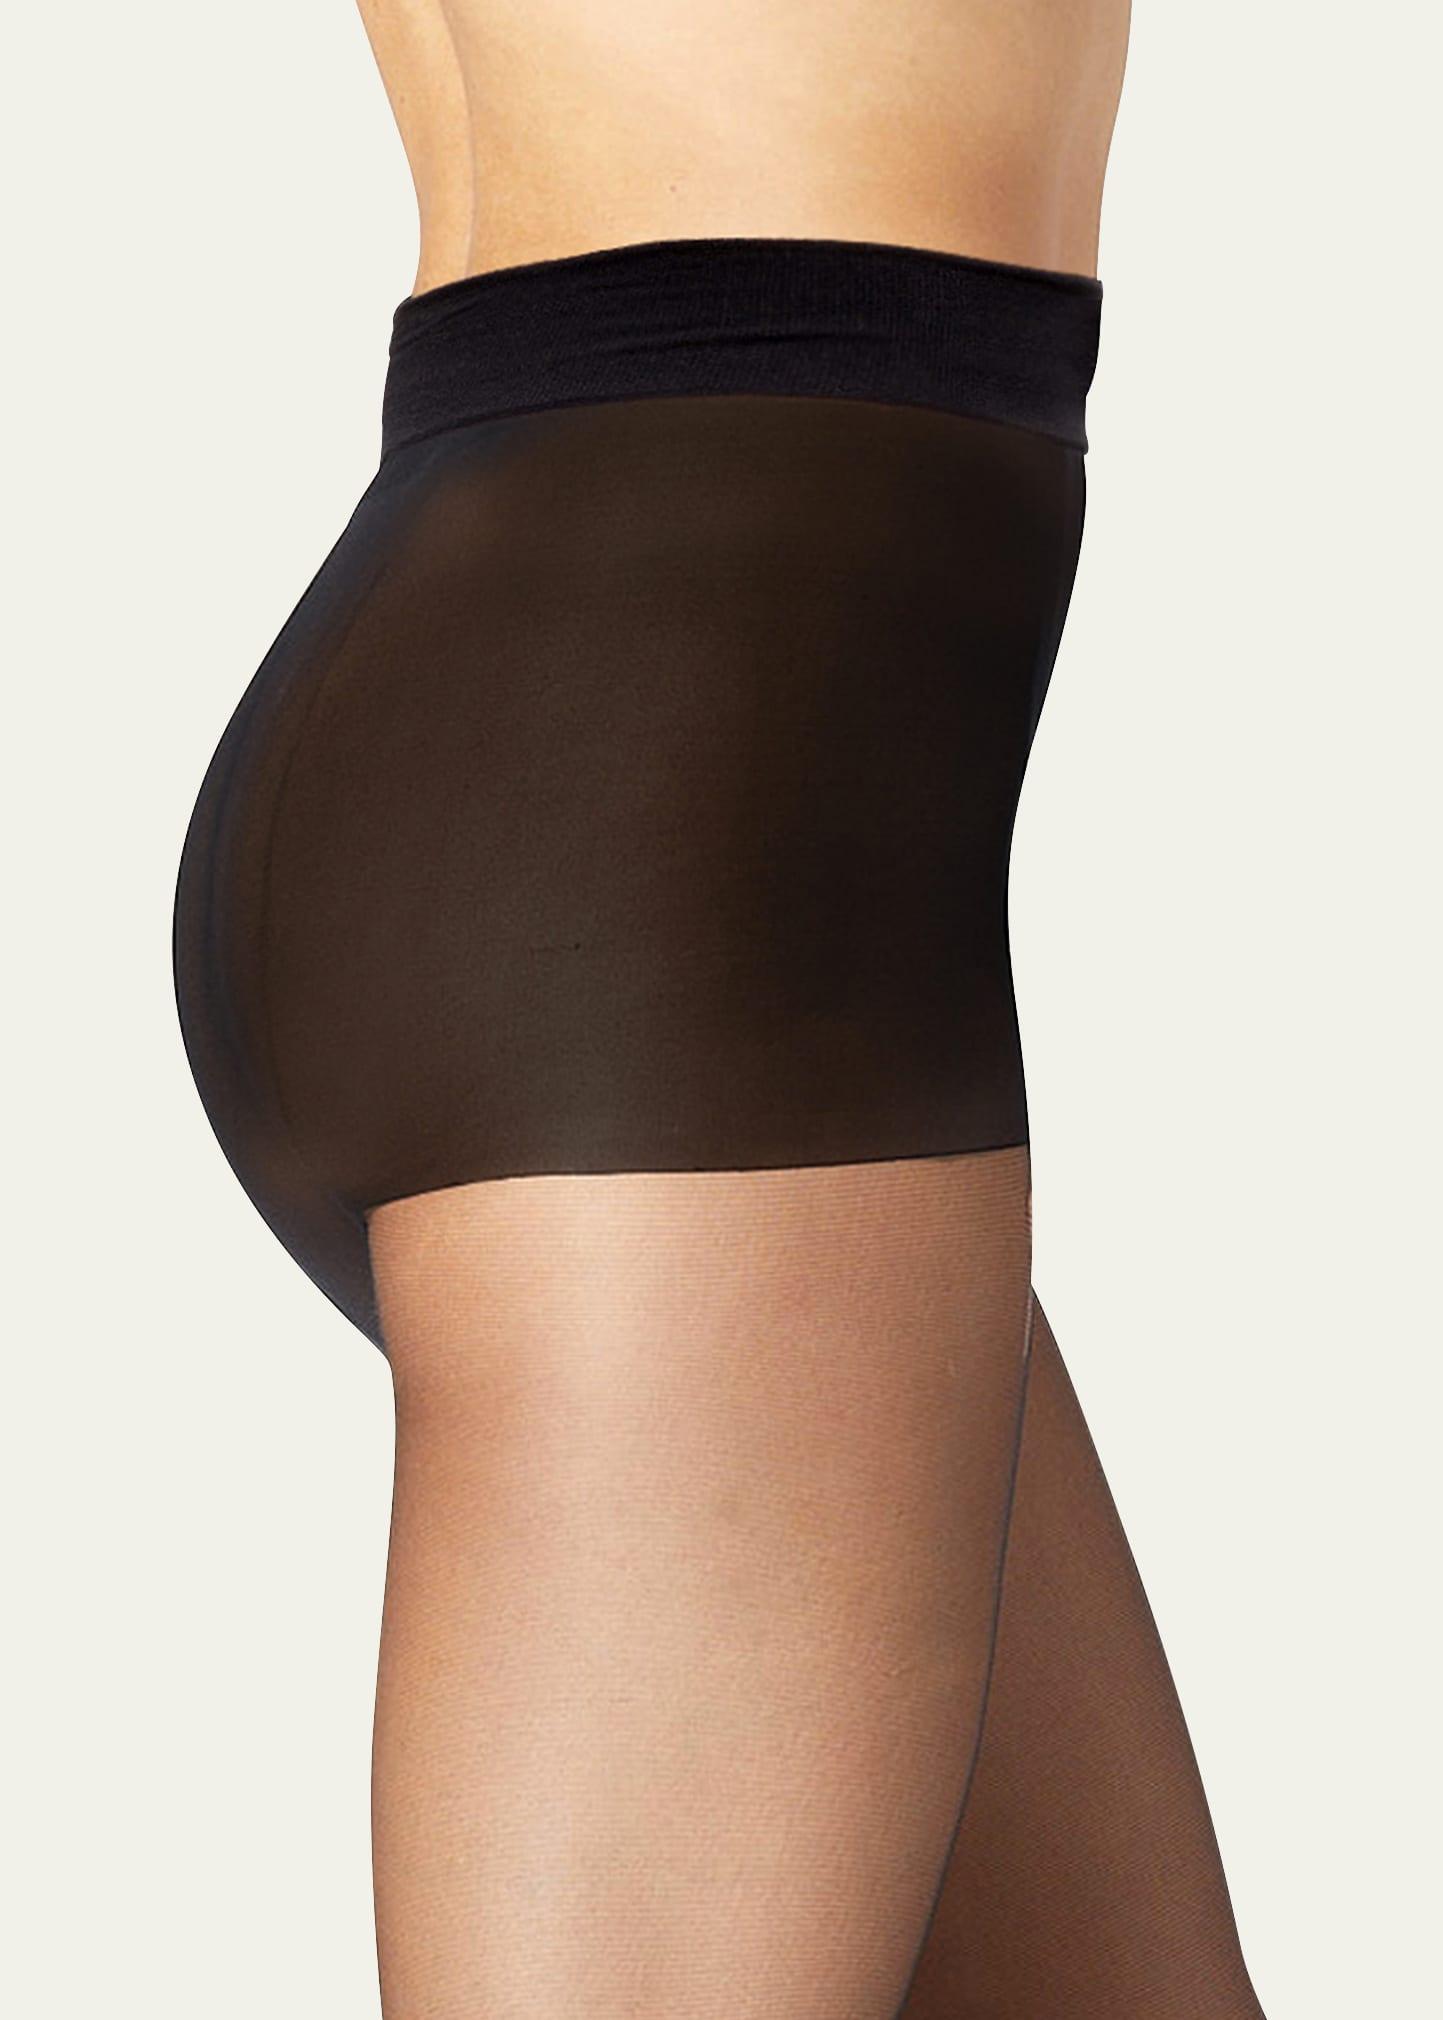 Stems Sheer Abdomen-control Tights in Natural